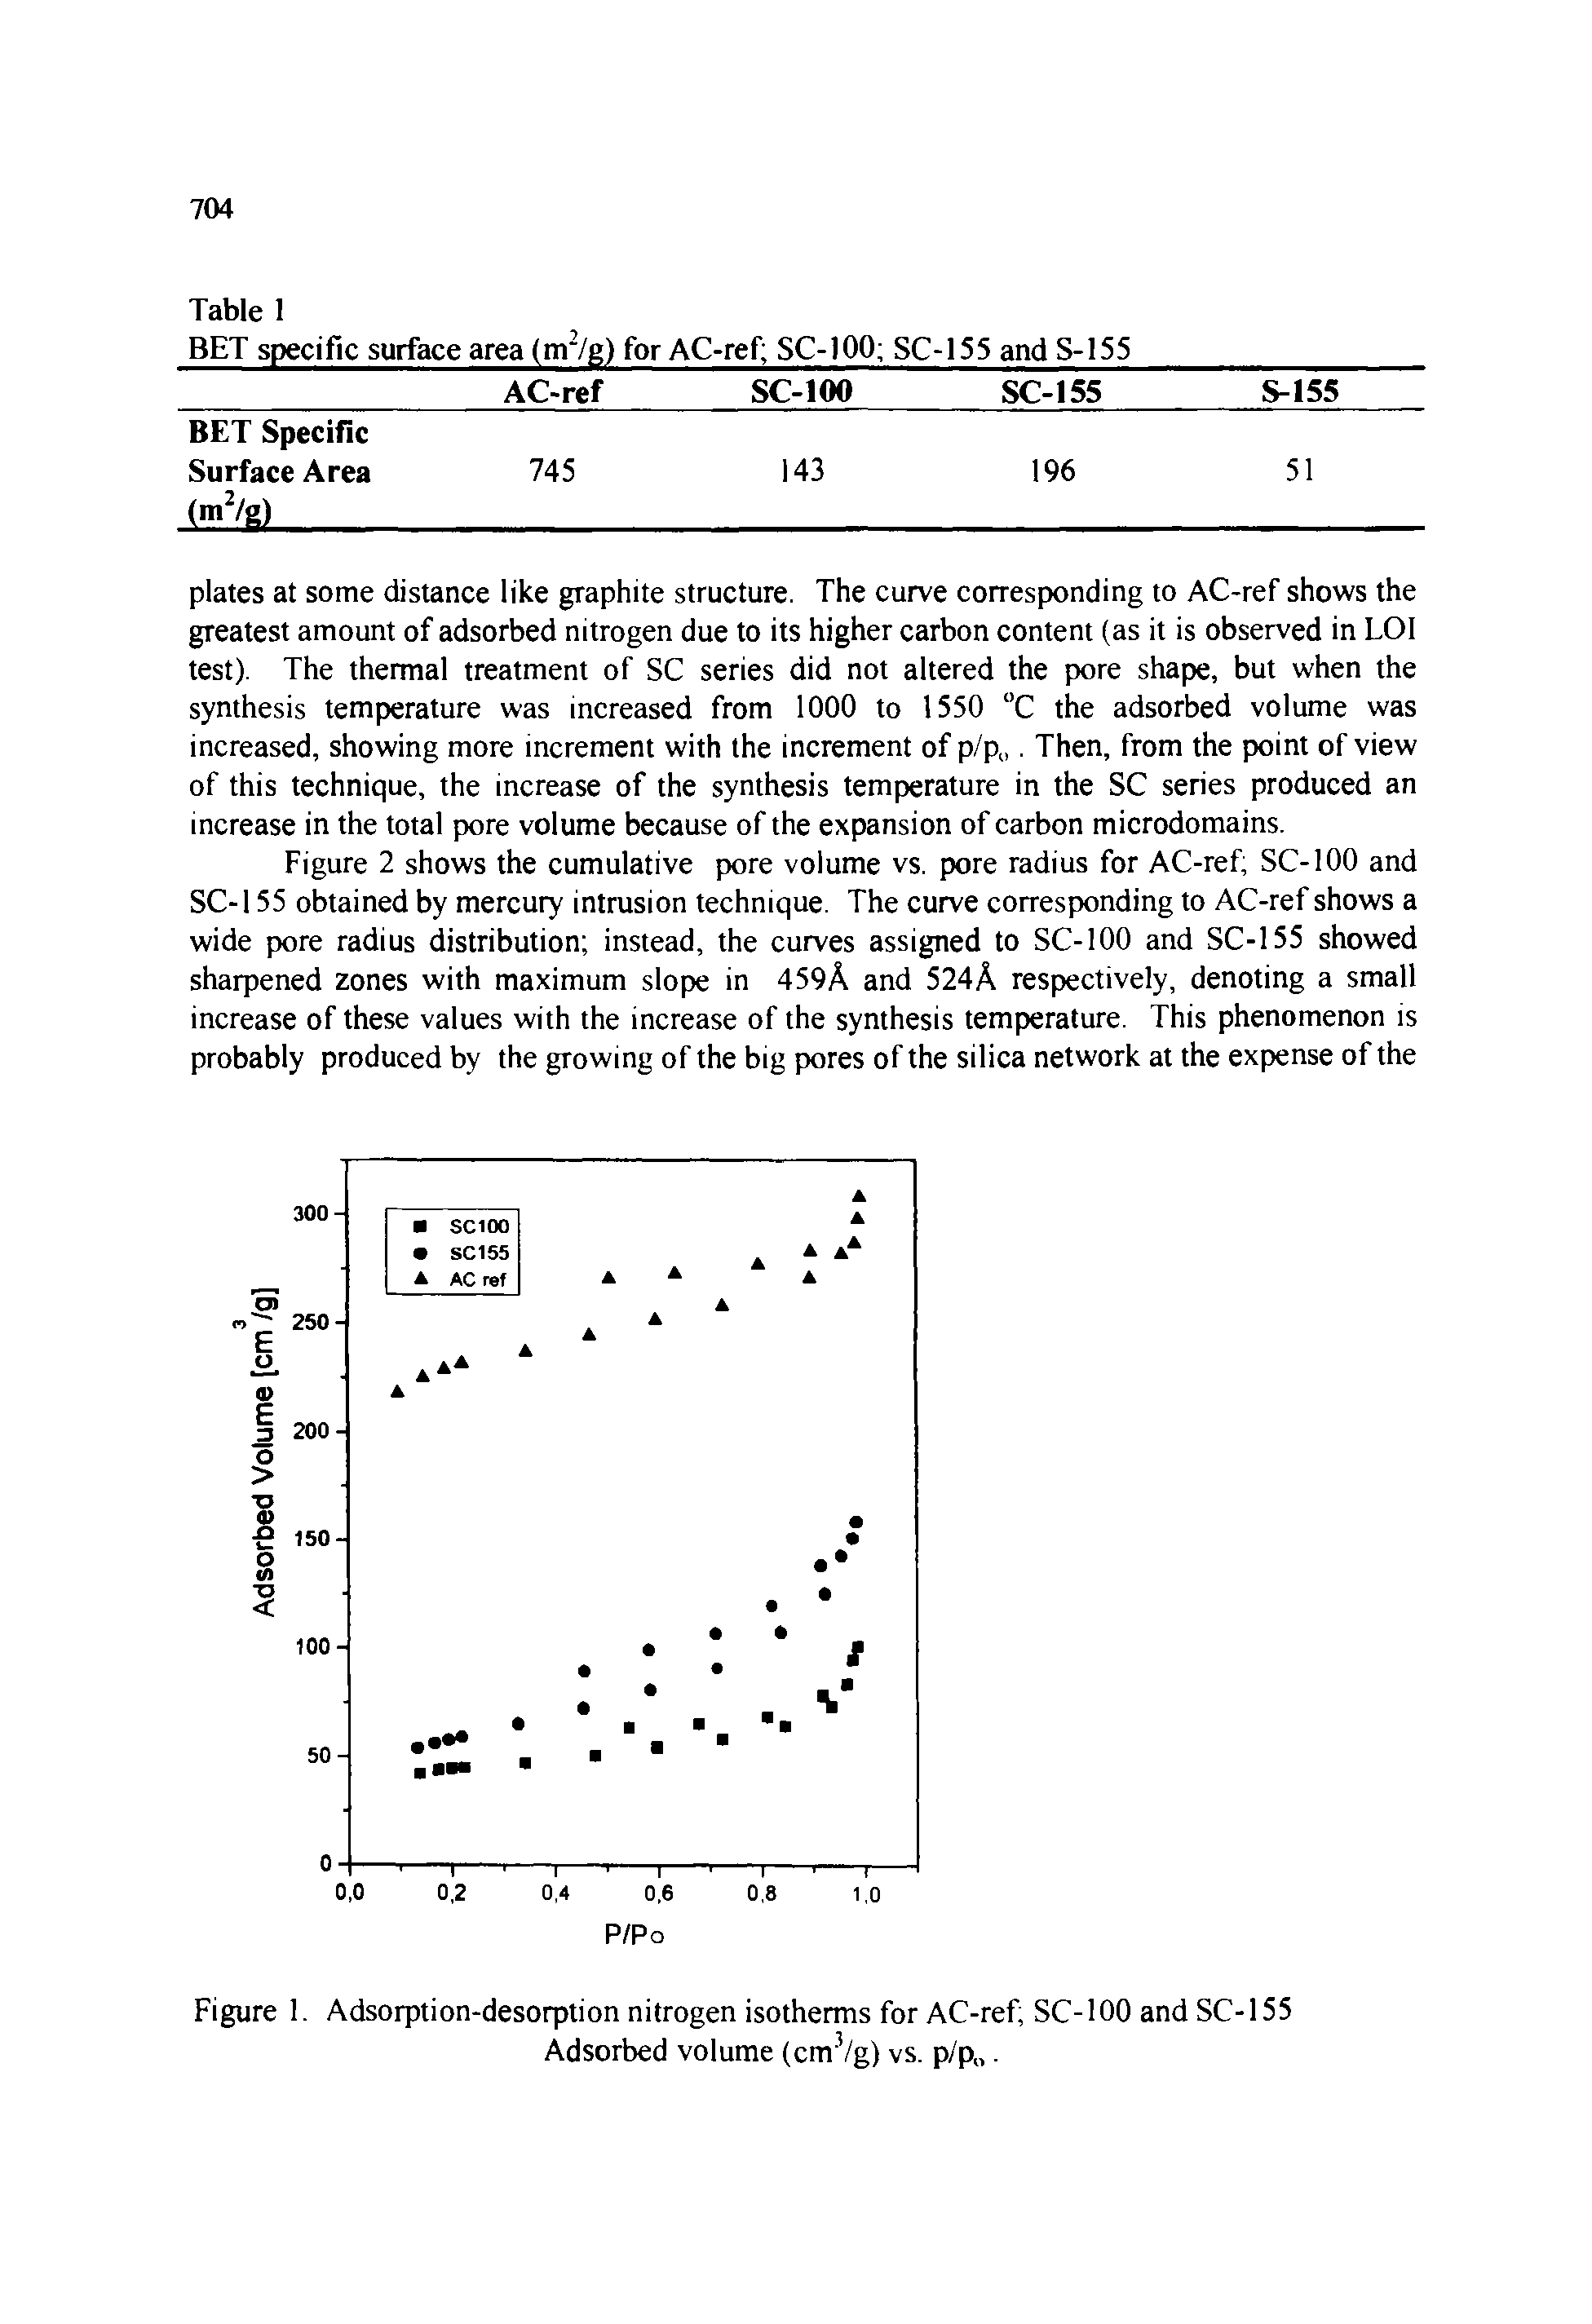 Figure 1. Adsorption-desorption nitrogen isotherms for AC-ref SC-100 and SC-155 Adsorbed volume (cnvVg) vs. p/p .